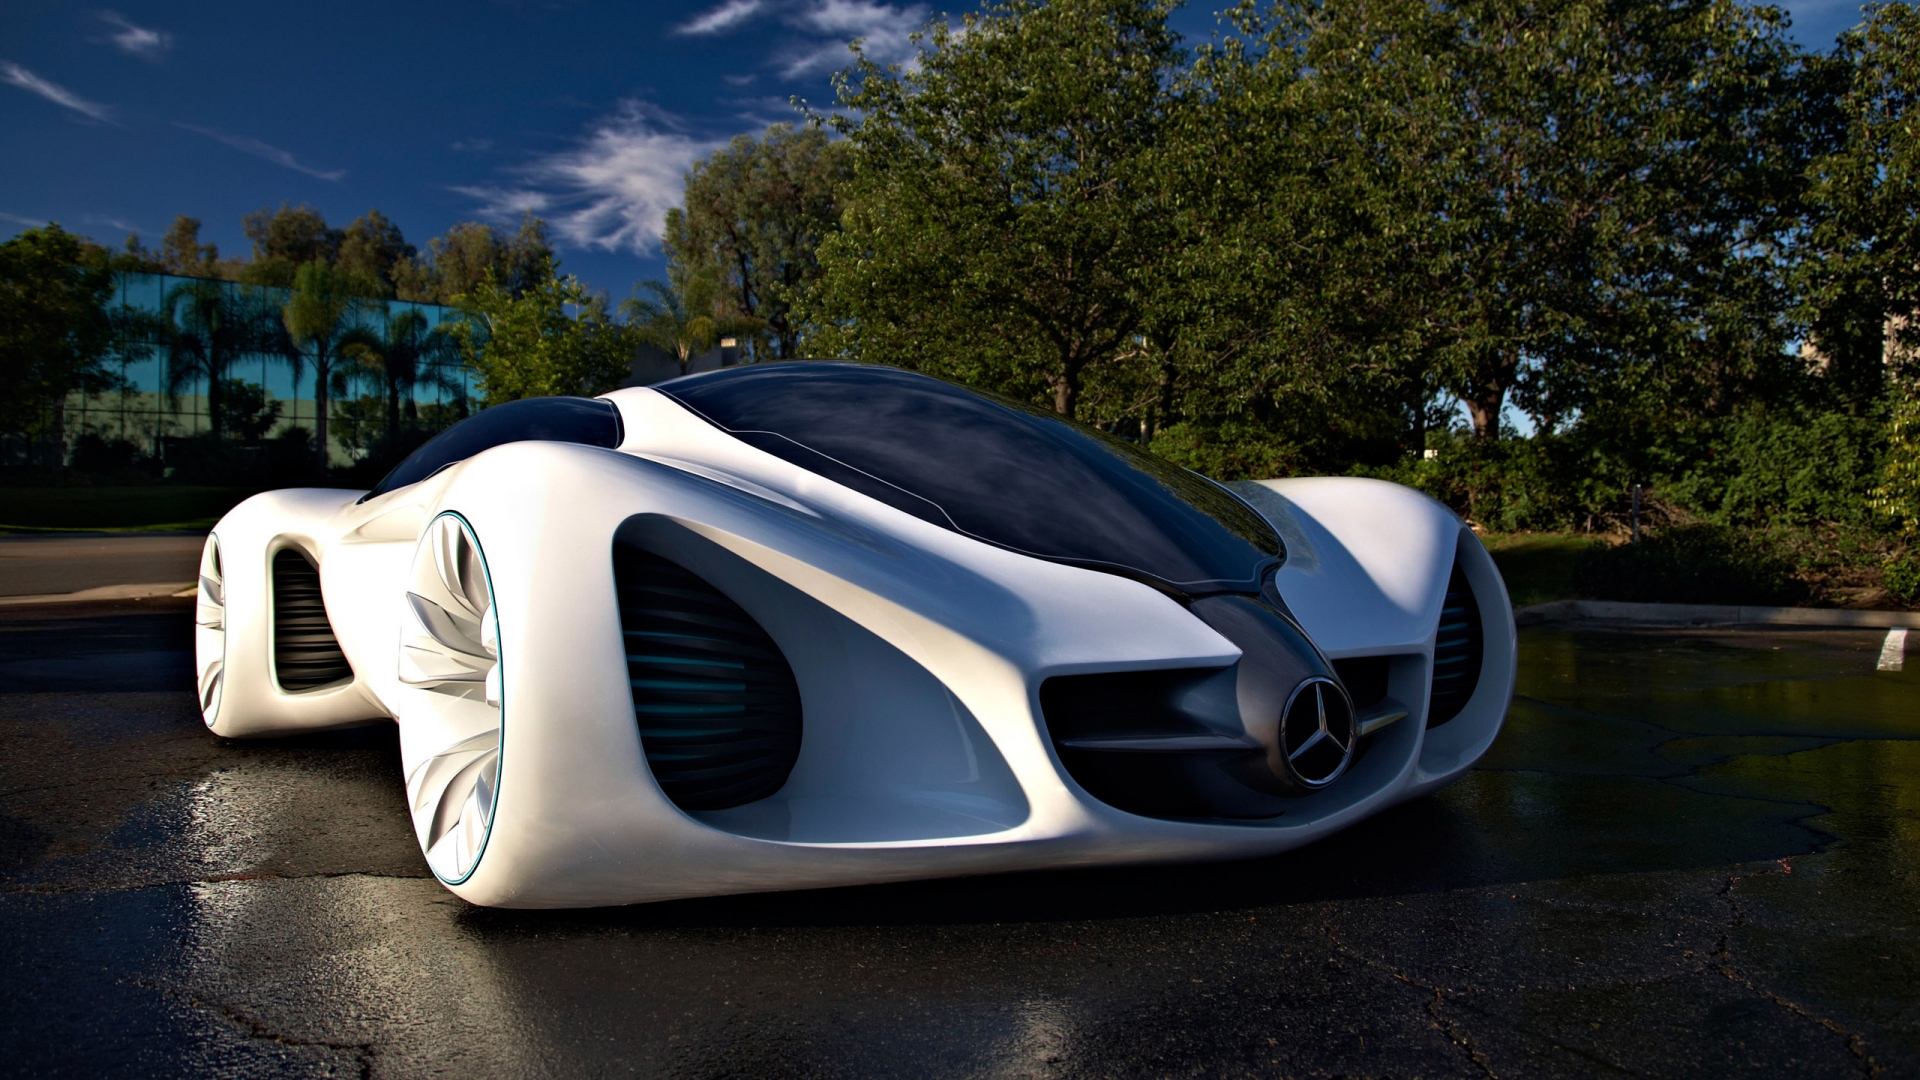 Mercedes Benz Biome for 1920 x 1080 HDTV 1080p resolution